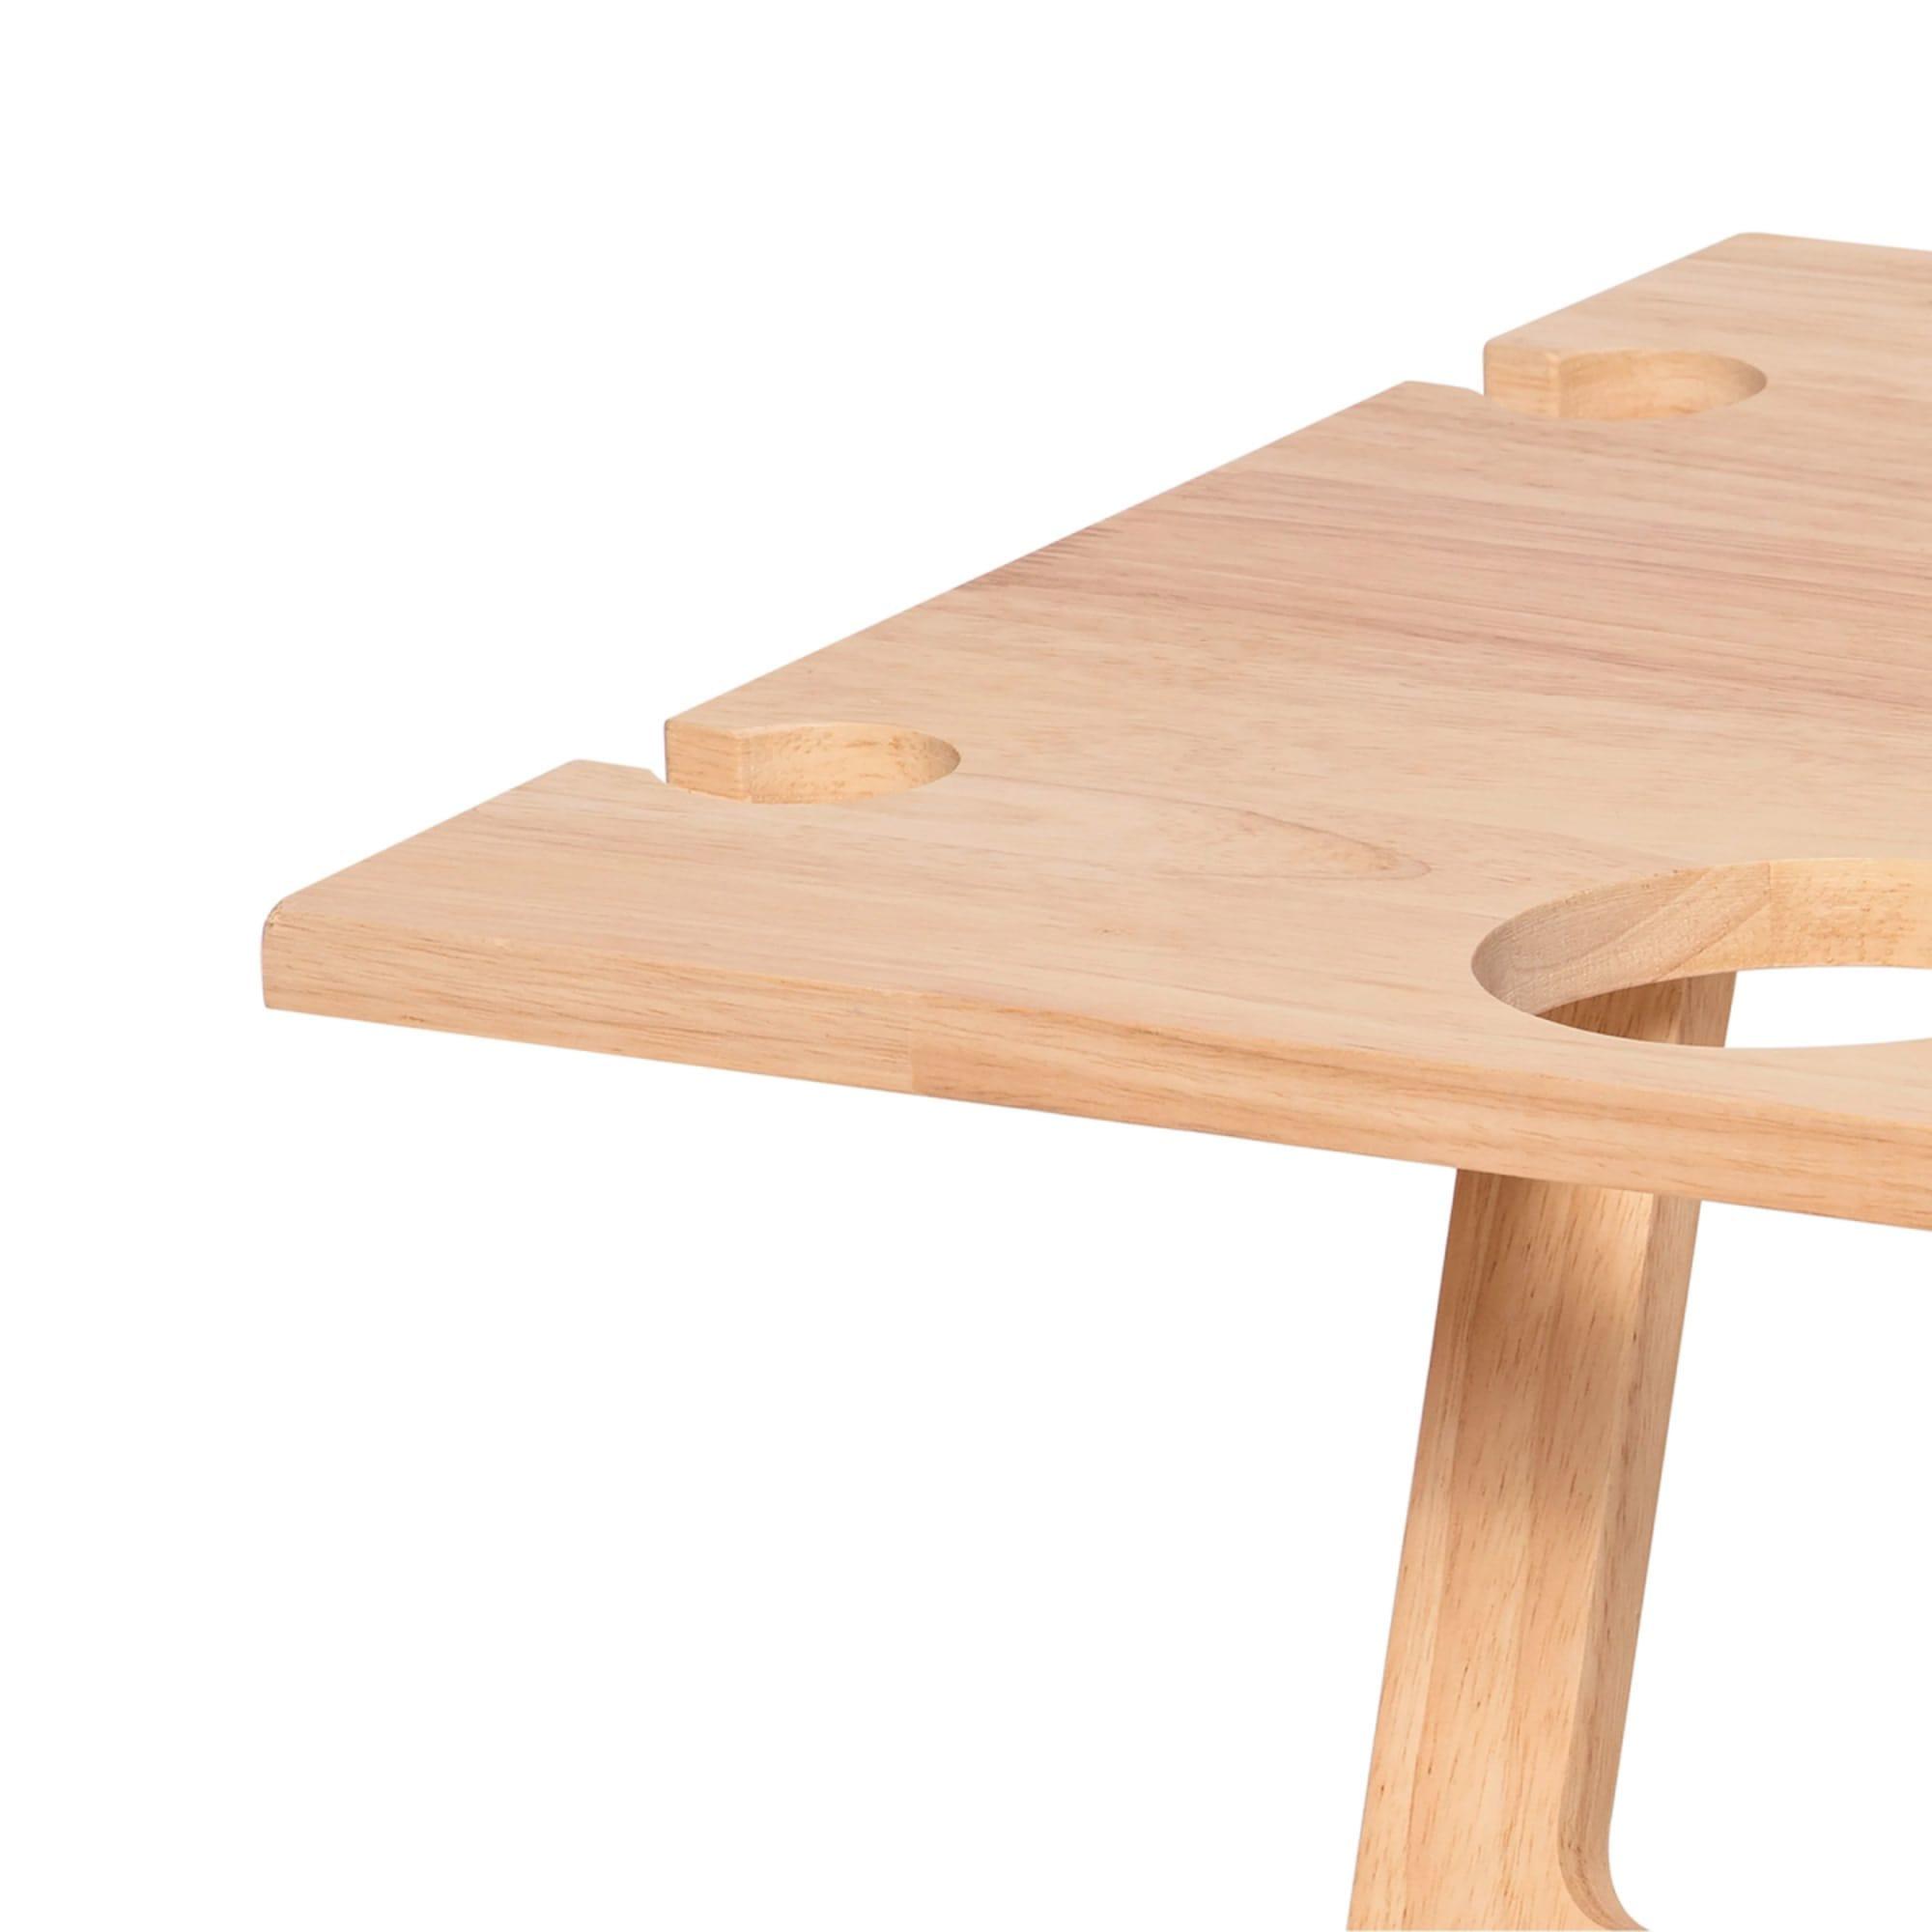 Tempa Fromagerie Square Collapsible Picnic Table Image 3